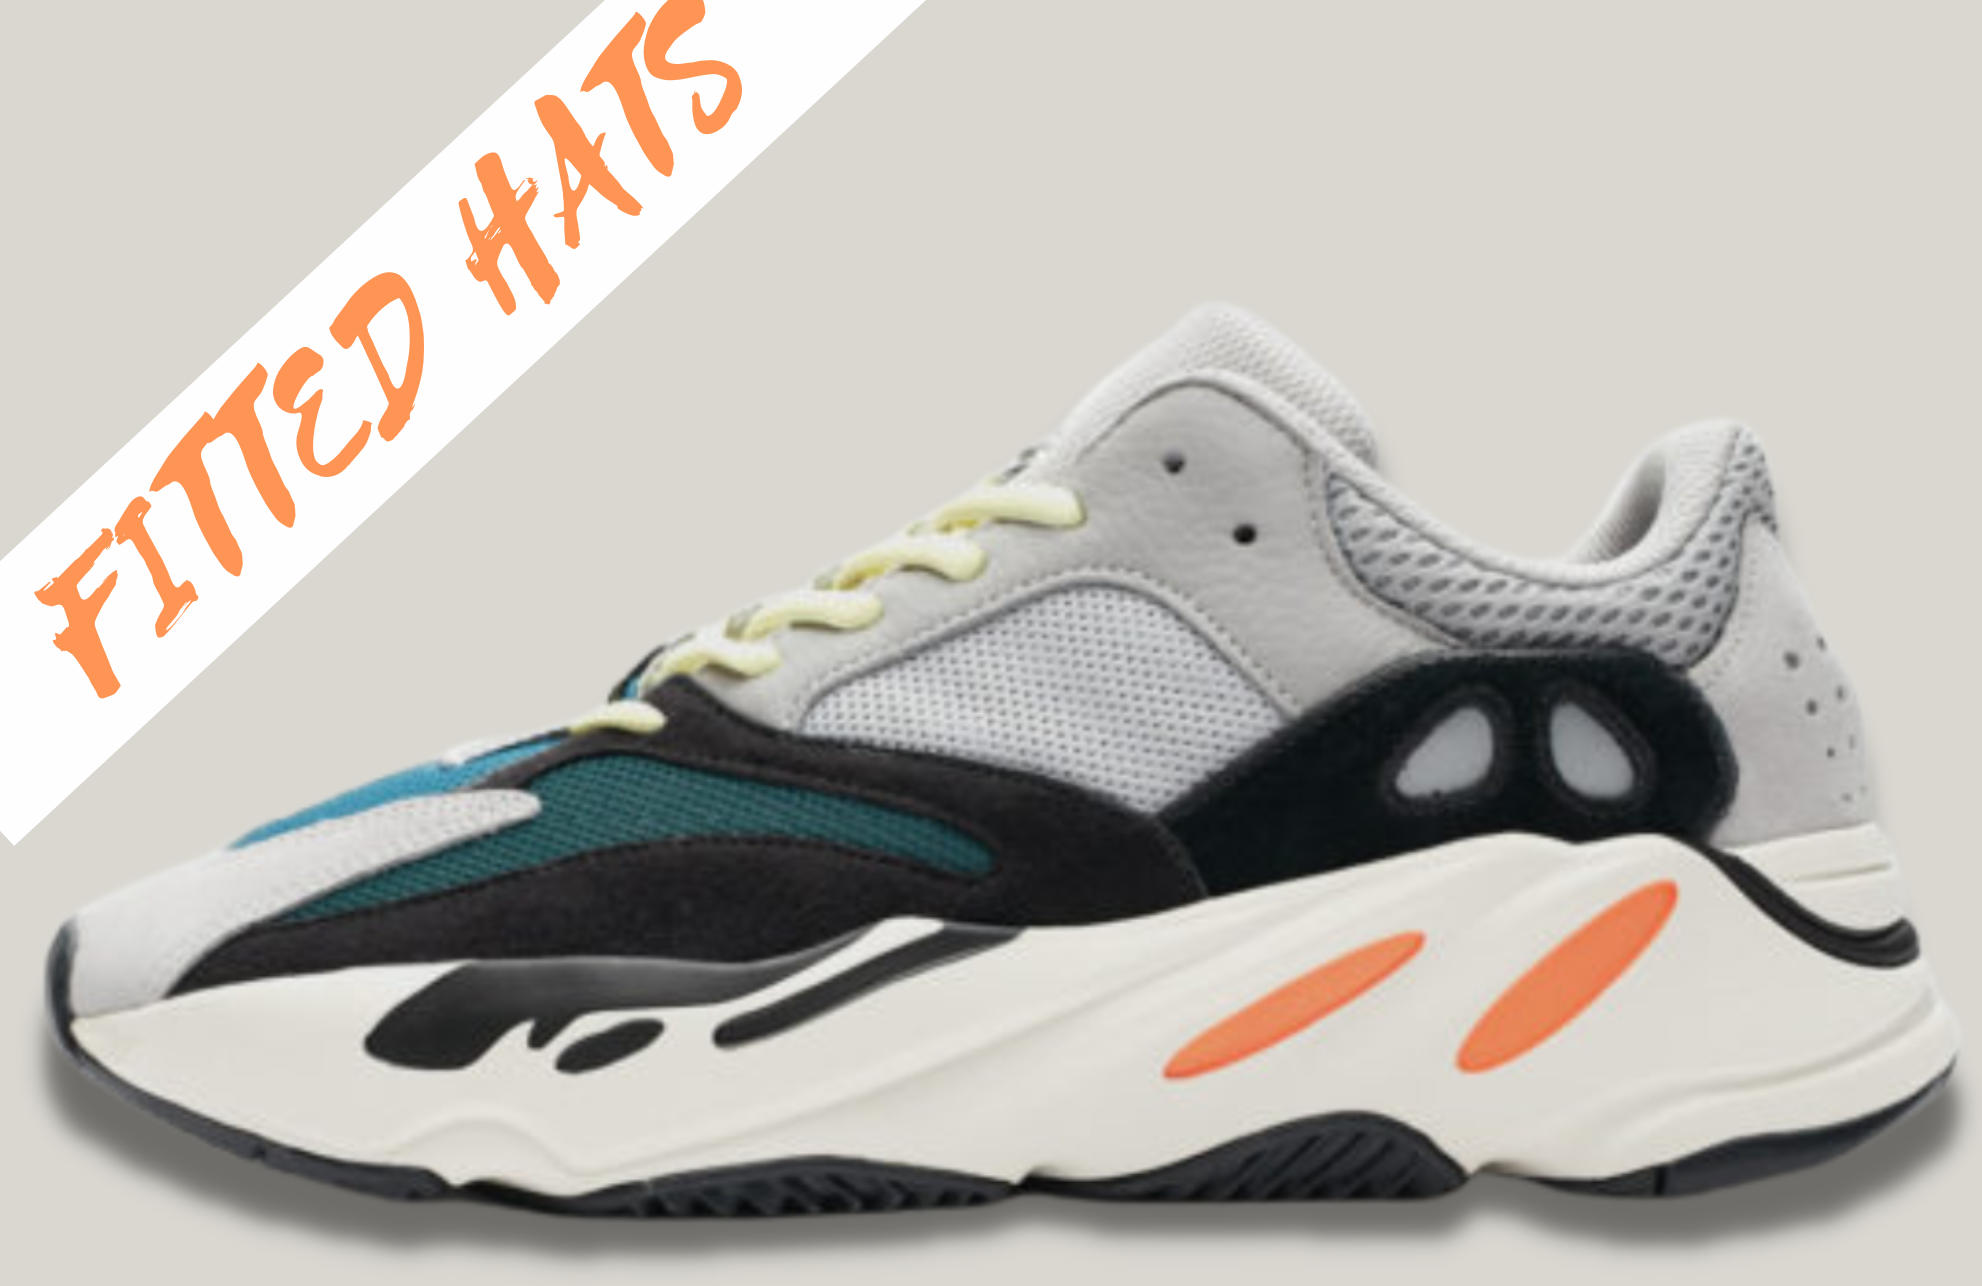 hats to match yeezy 700 wave runner